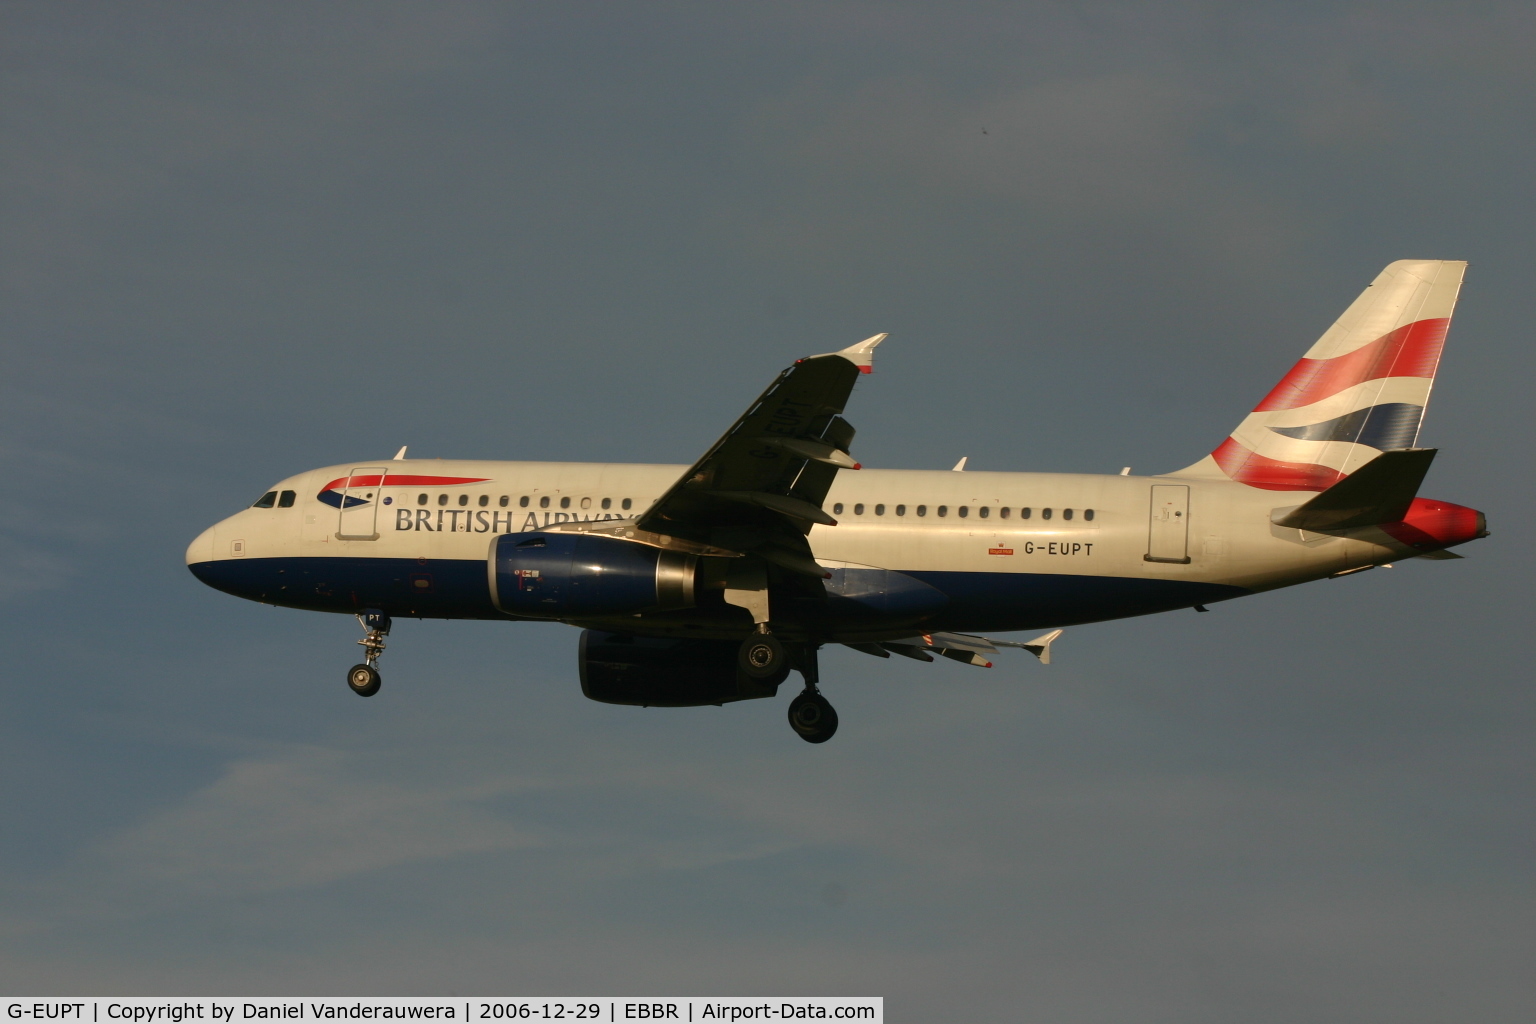 G-EUPT, 2000 Airbus A319-131 C/N 1380, arrival of flight BA392 from LHR